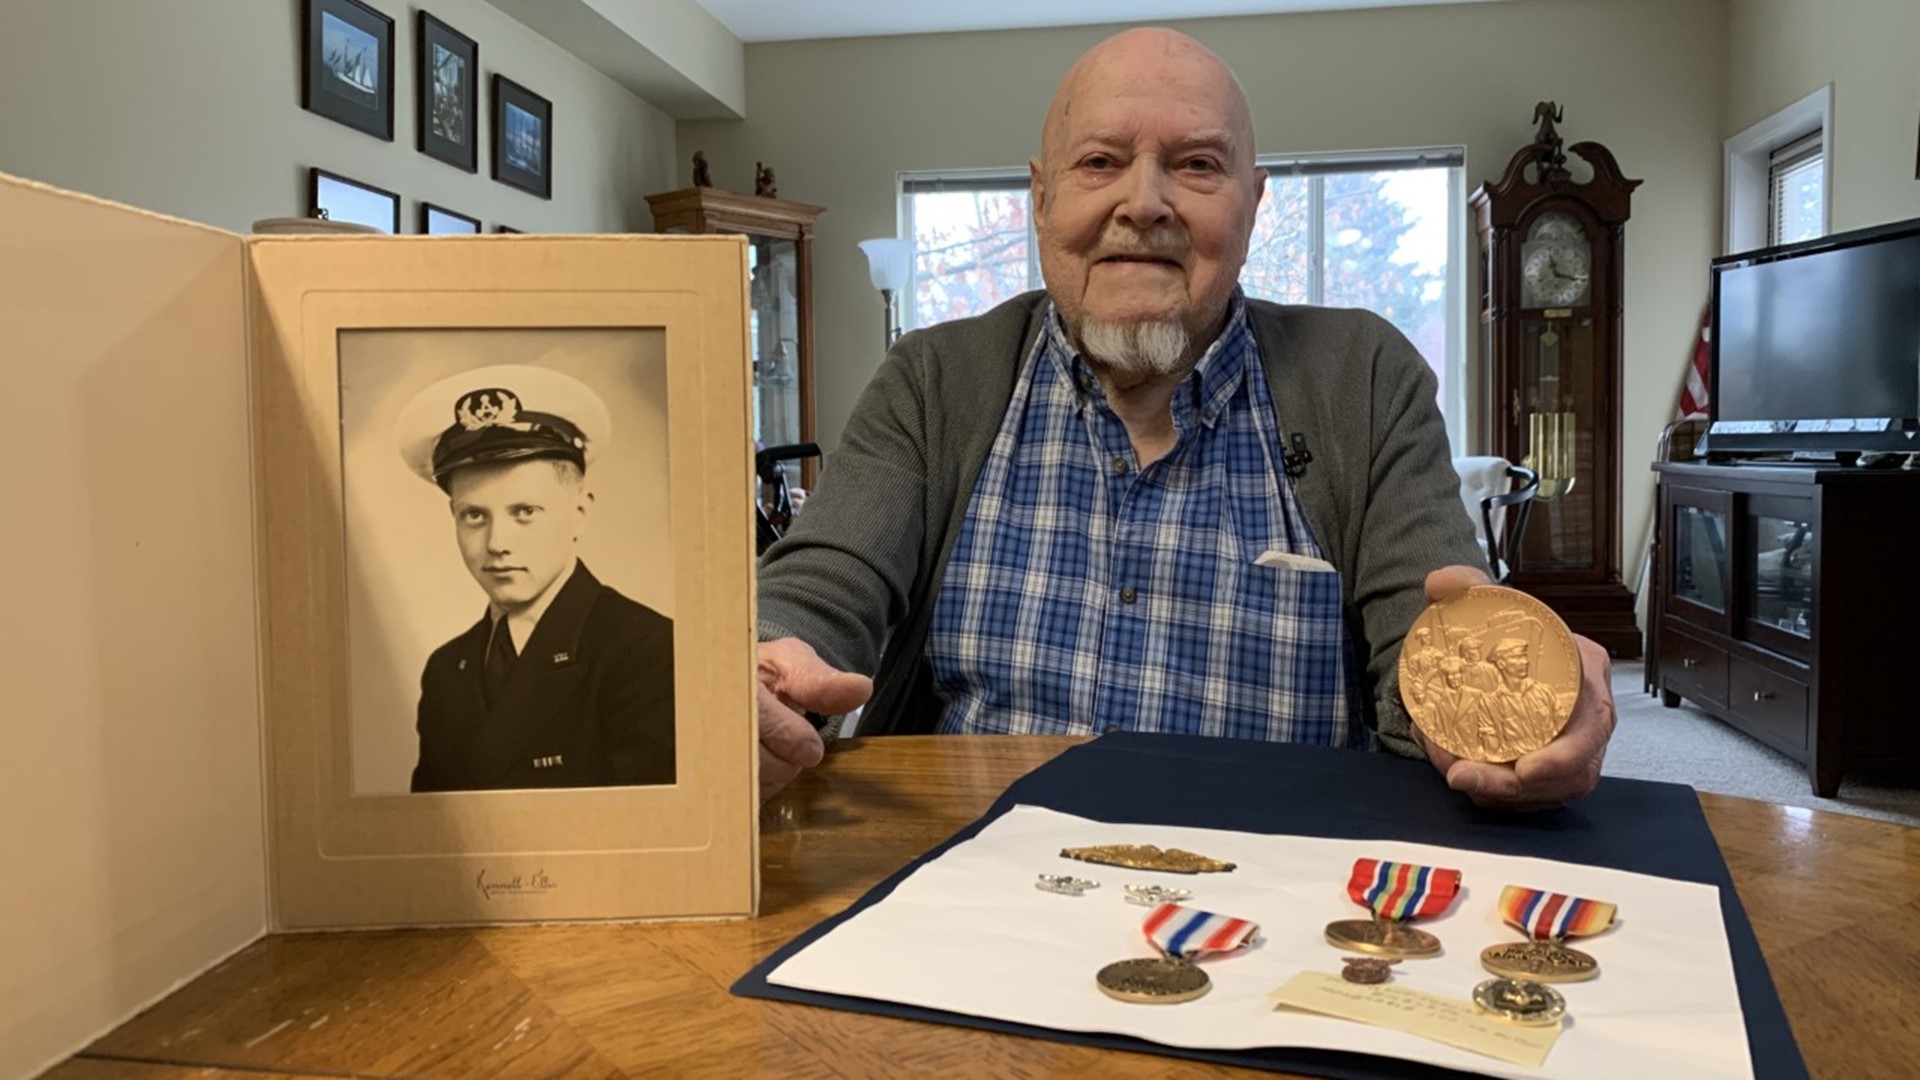 After he was honored in 2020, Thorne Hilt recently received the medal, the Congressional Gold Medal, the highest honor a civilian can be awarded by Congress.